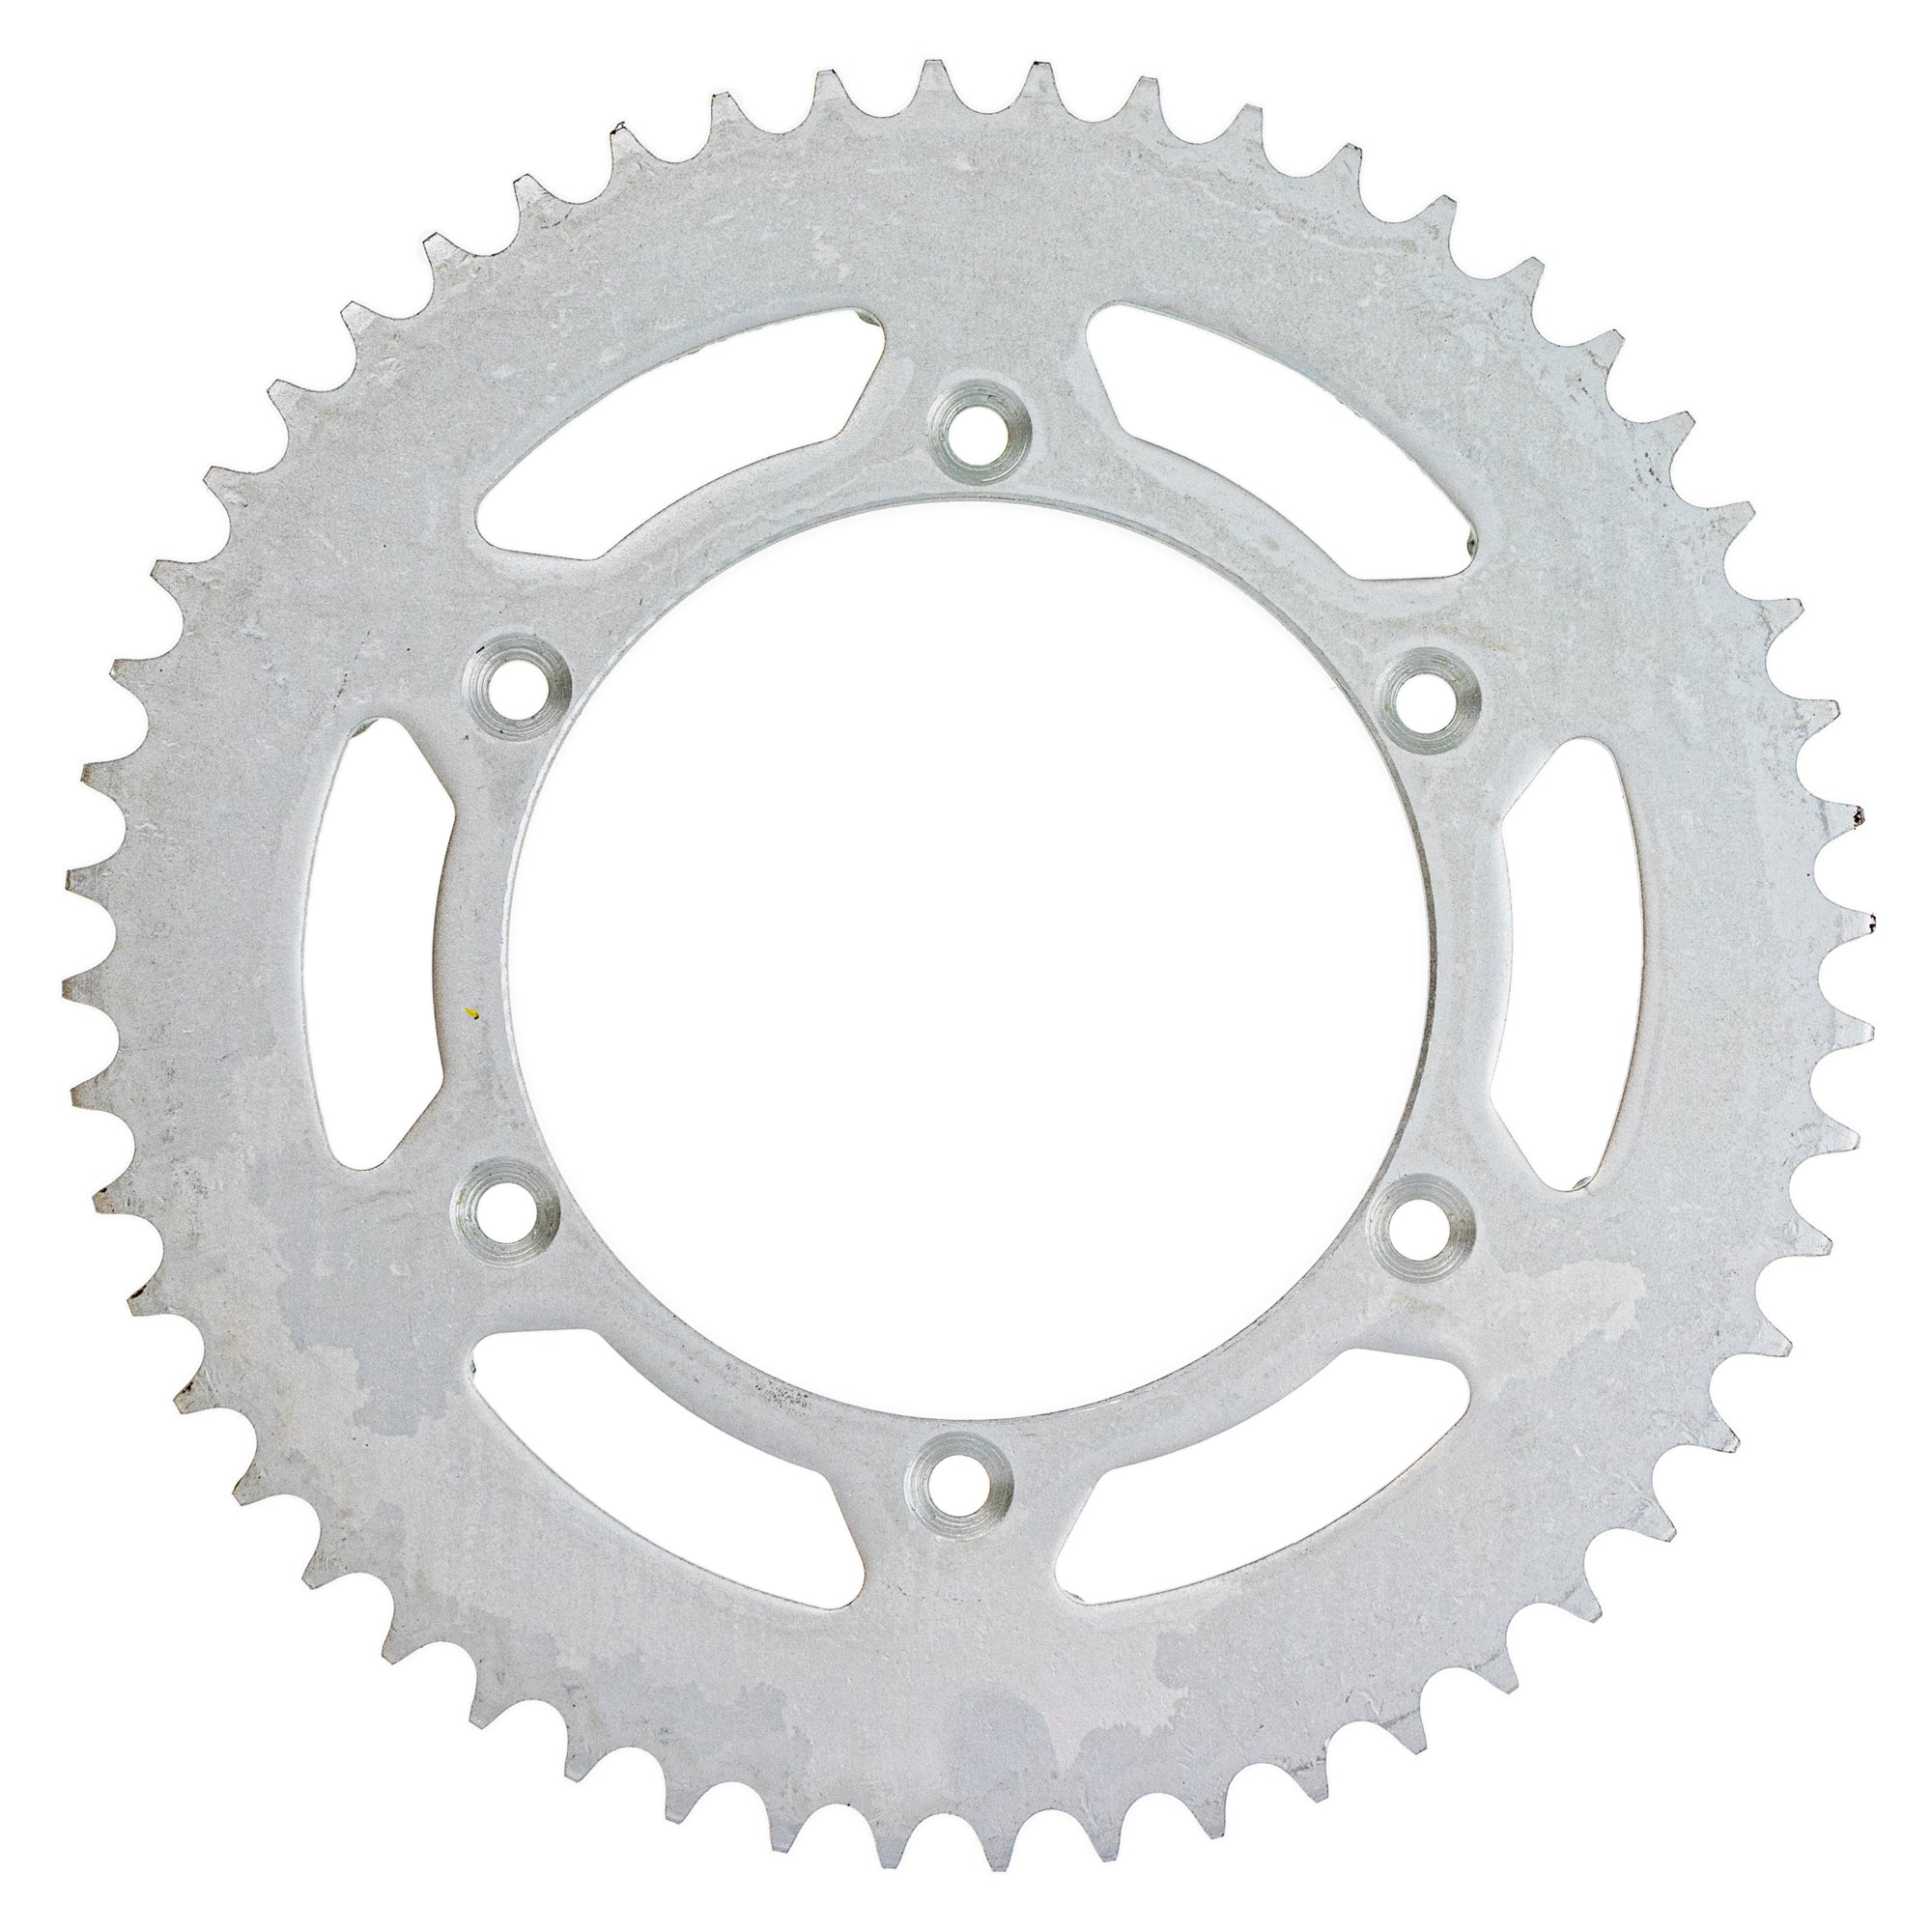 Drive Sprockets & Chain Kit For BETA MK1004654